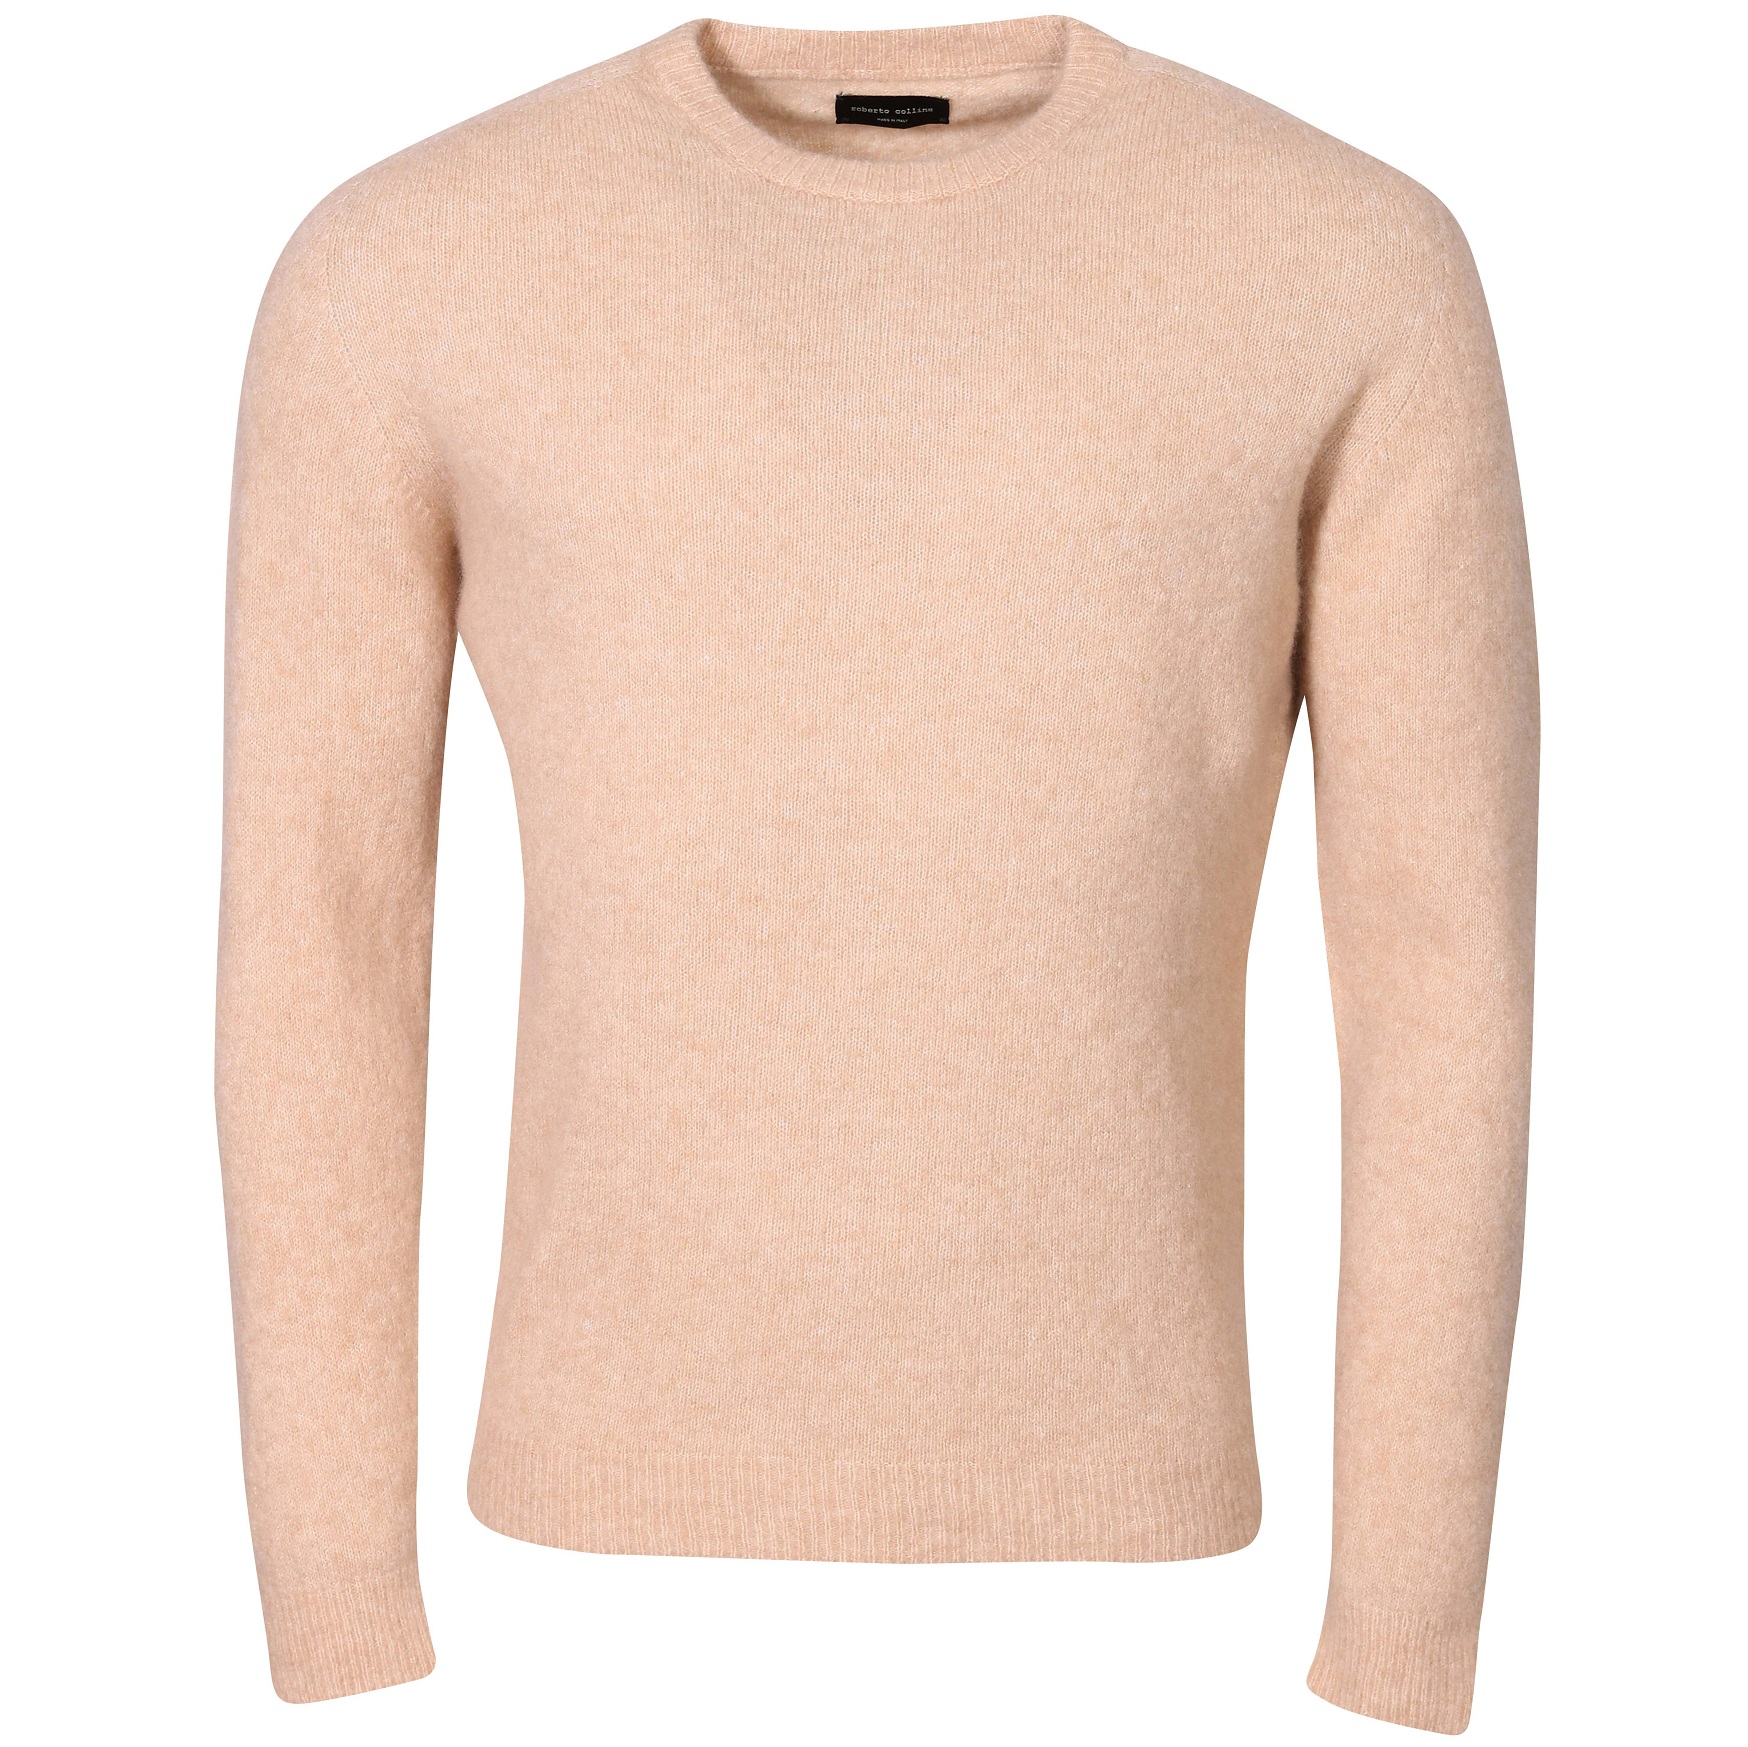 ROBERTO COLLINA Fluffy Cashmere Knit Pullover in Camel